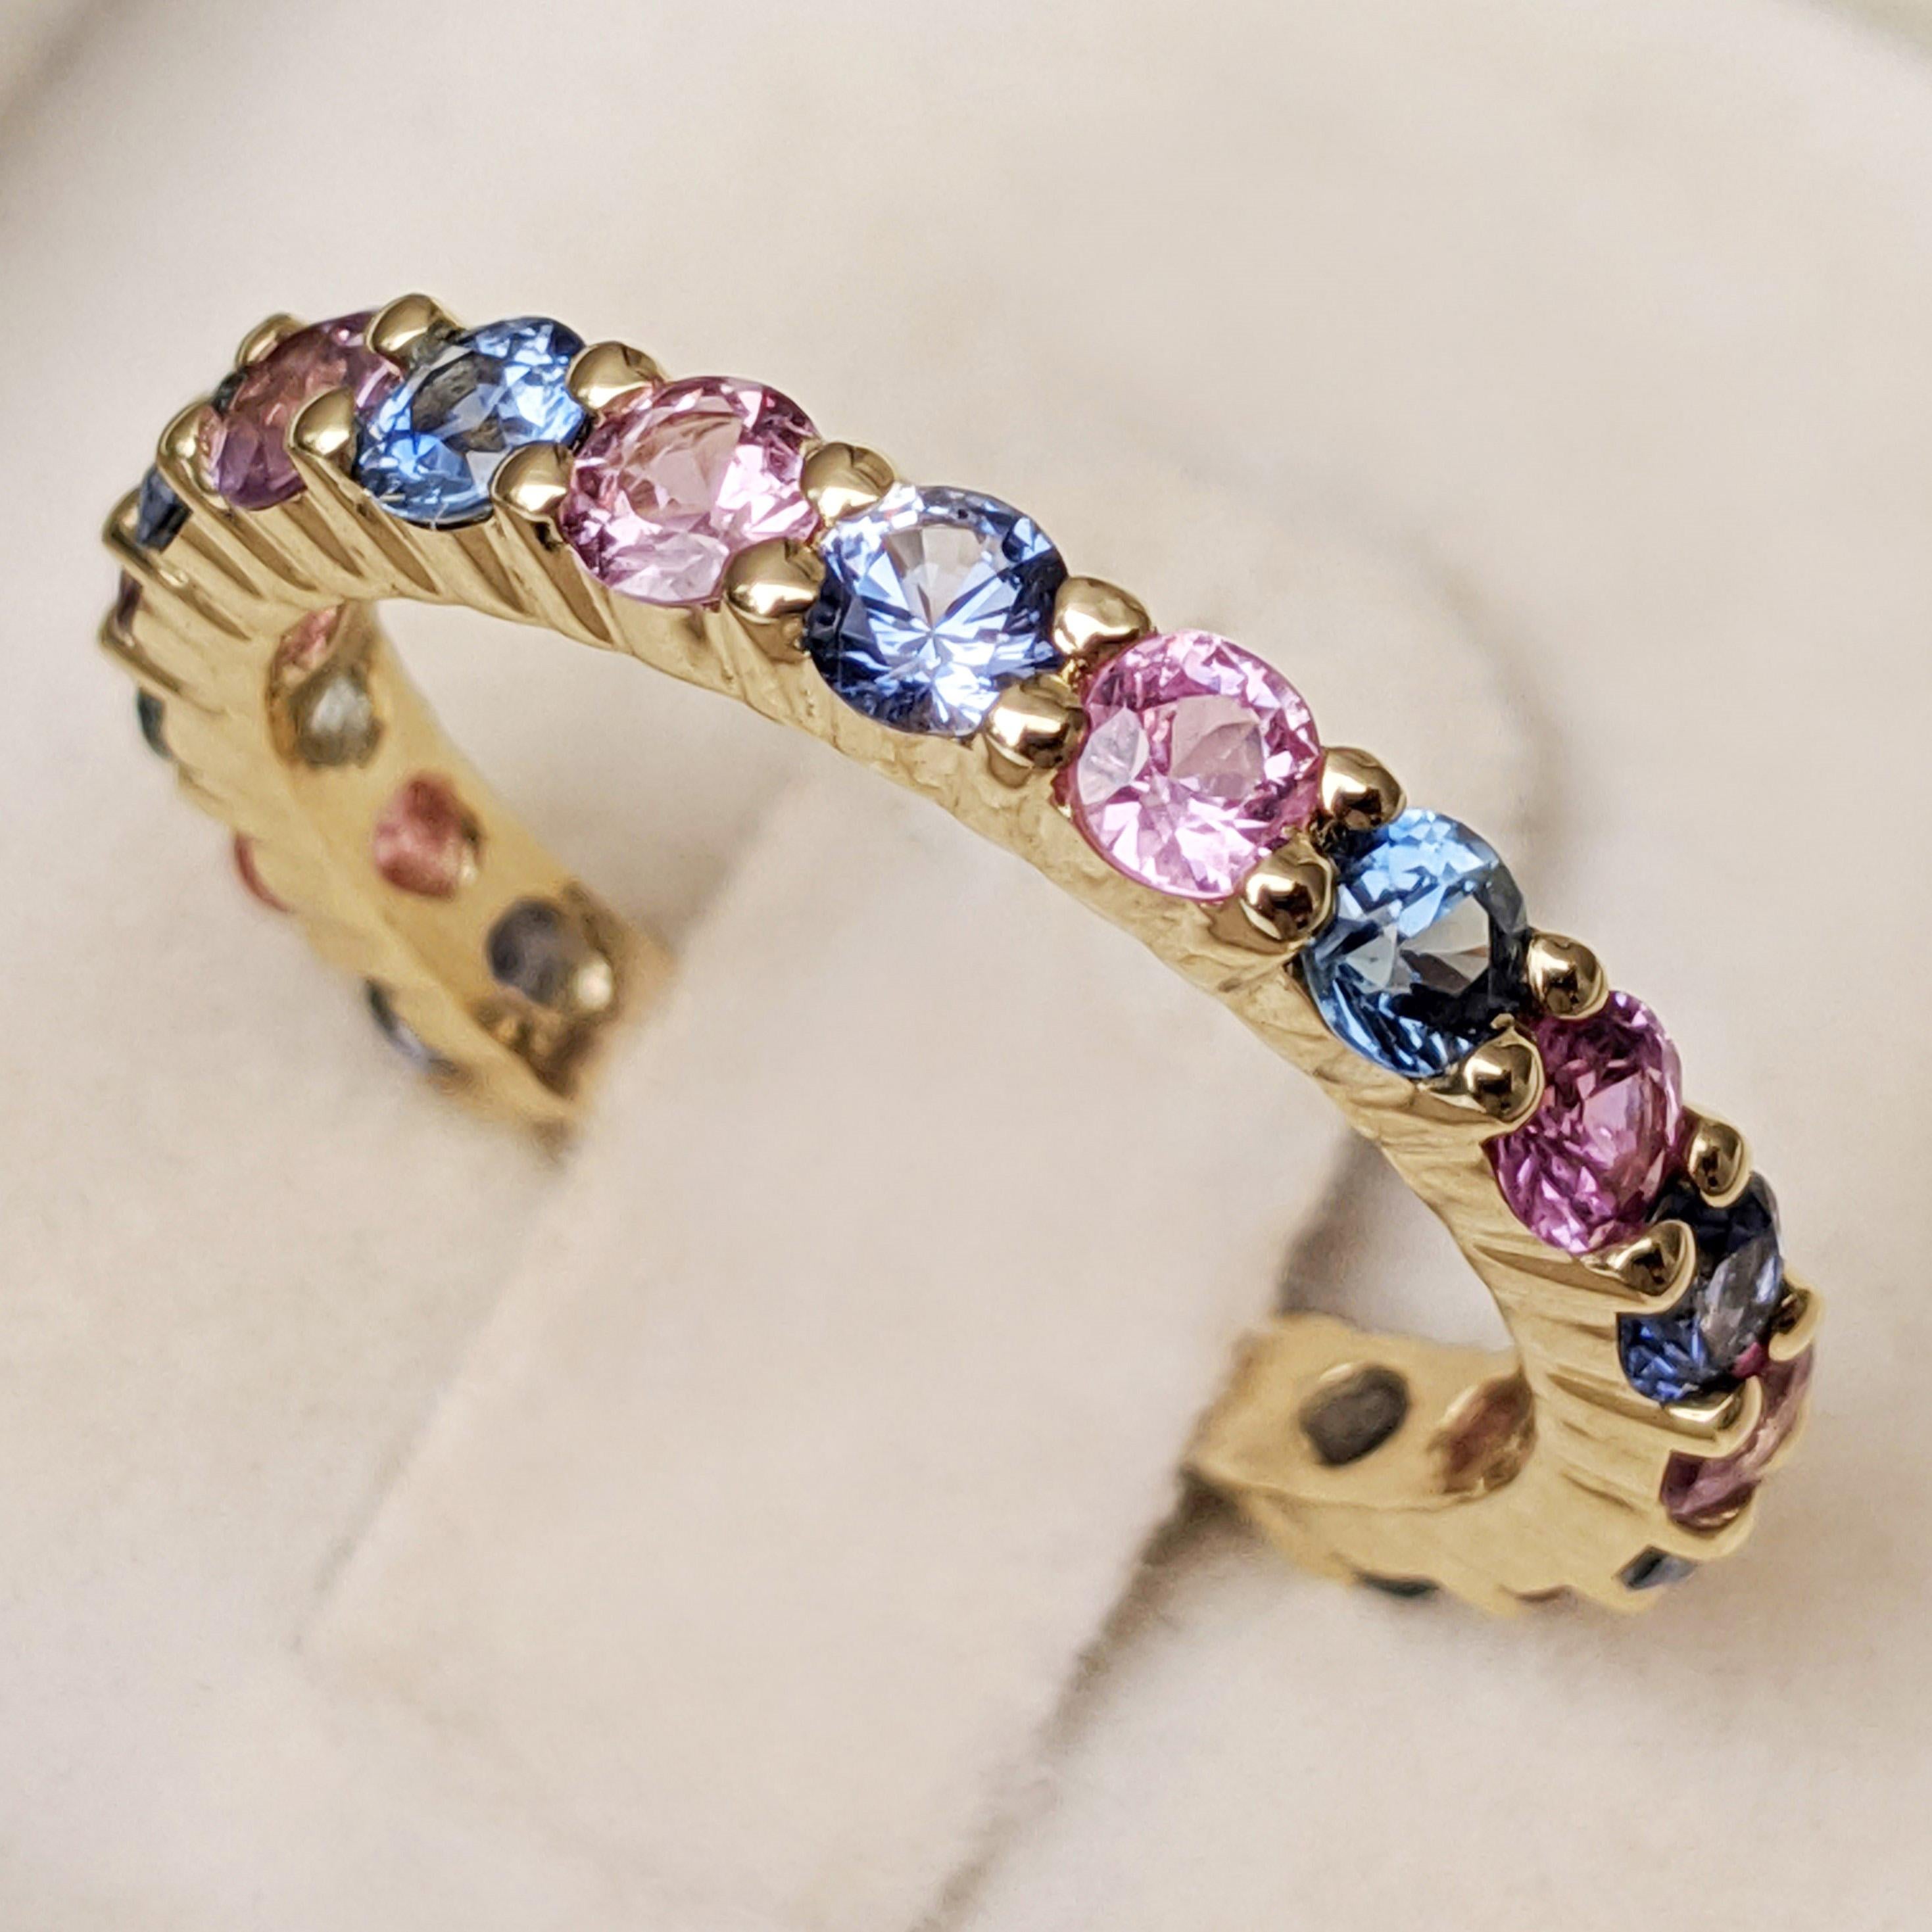 $1 NO RESERVE! 1.90 Carat Sapphire 3/4 Eternity Band - 14 kt. Gold - Ring 1